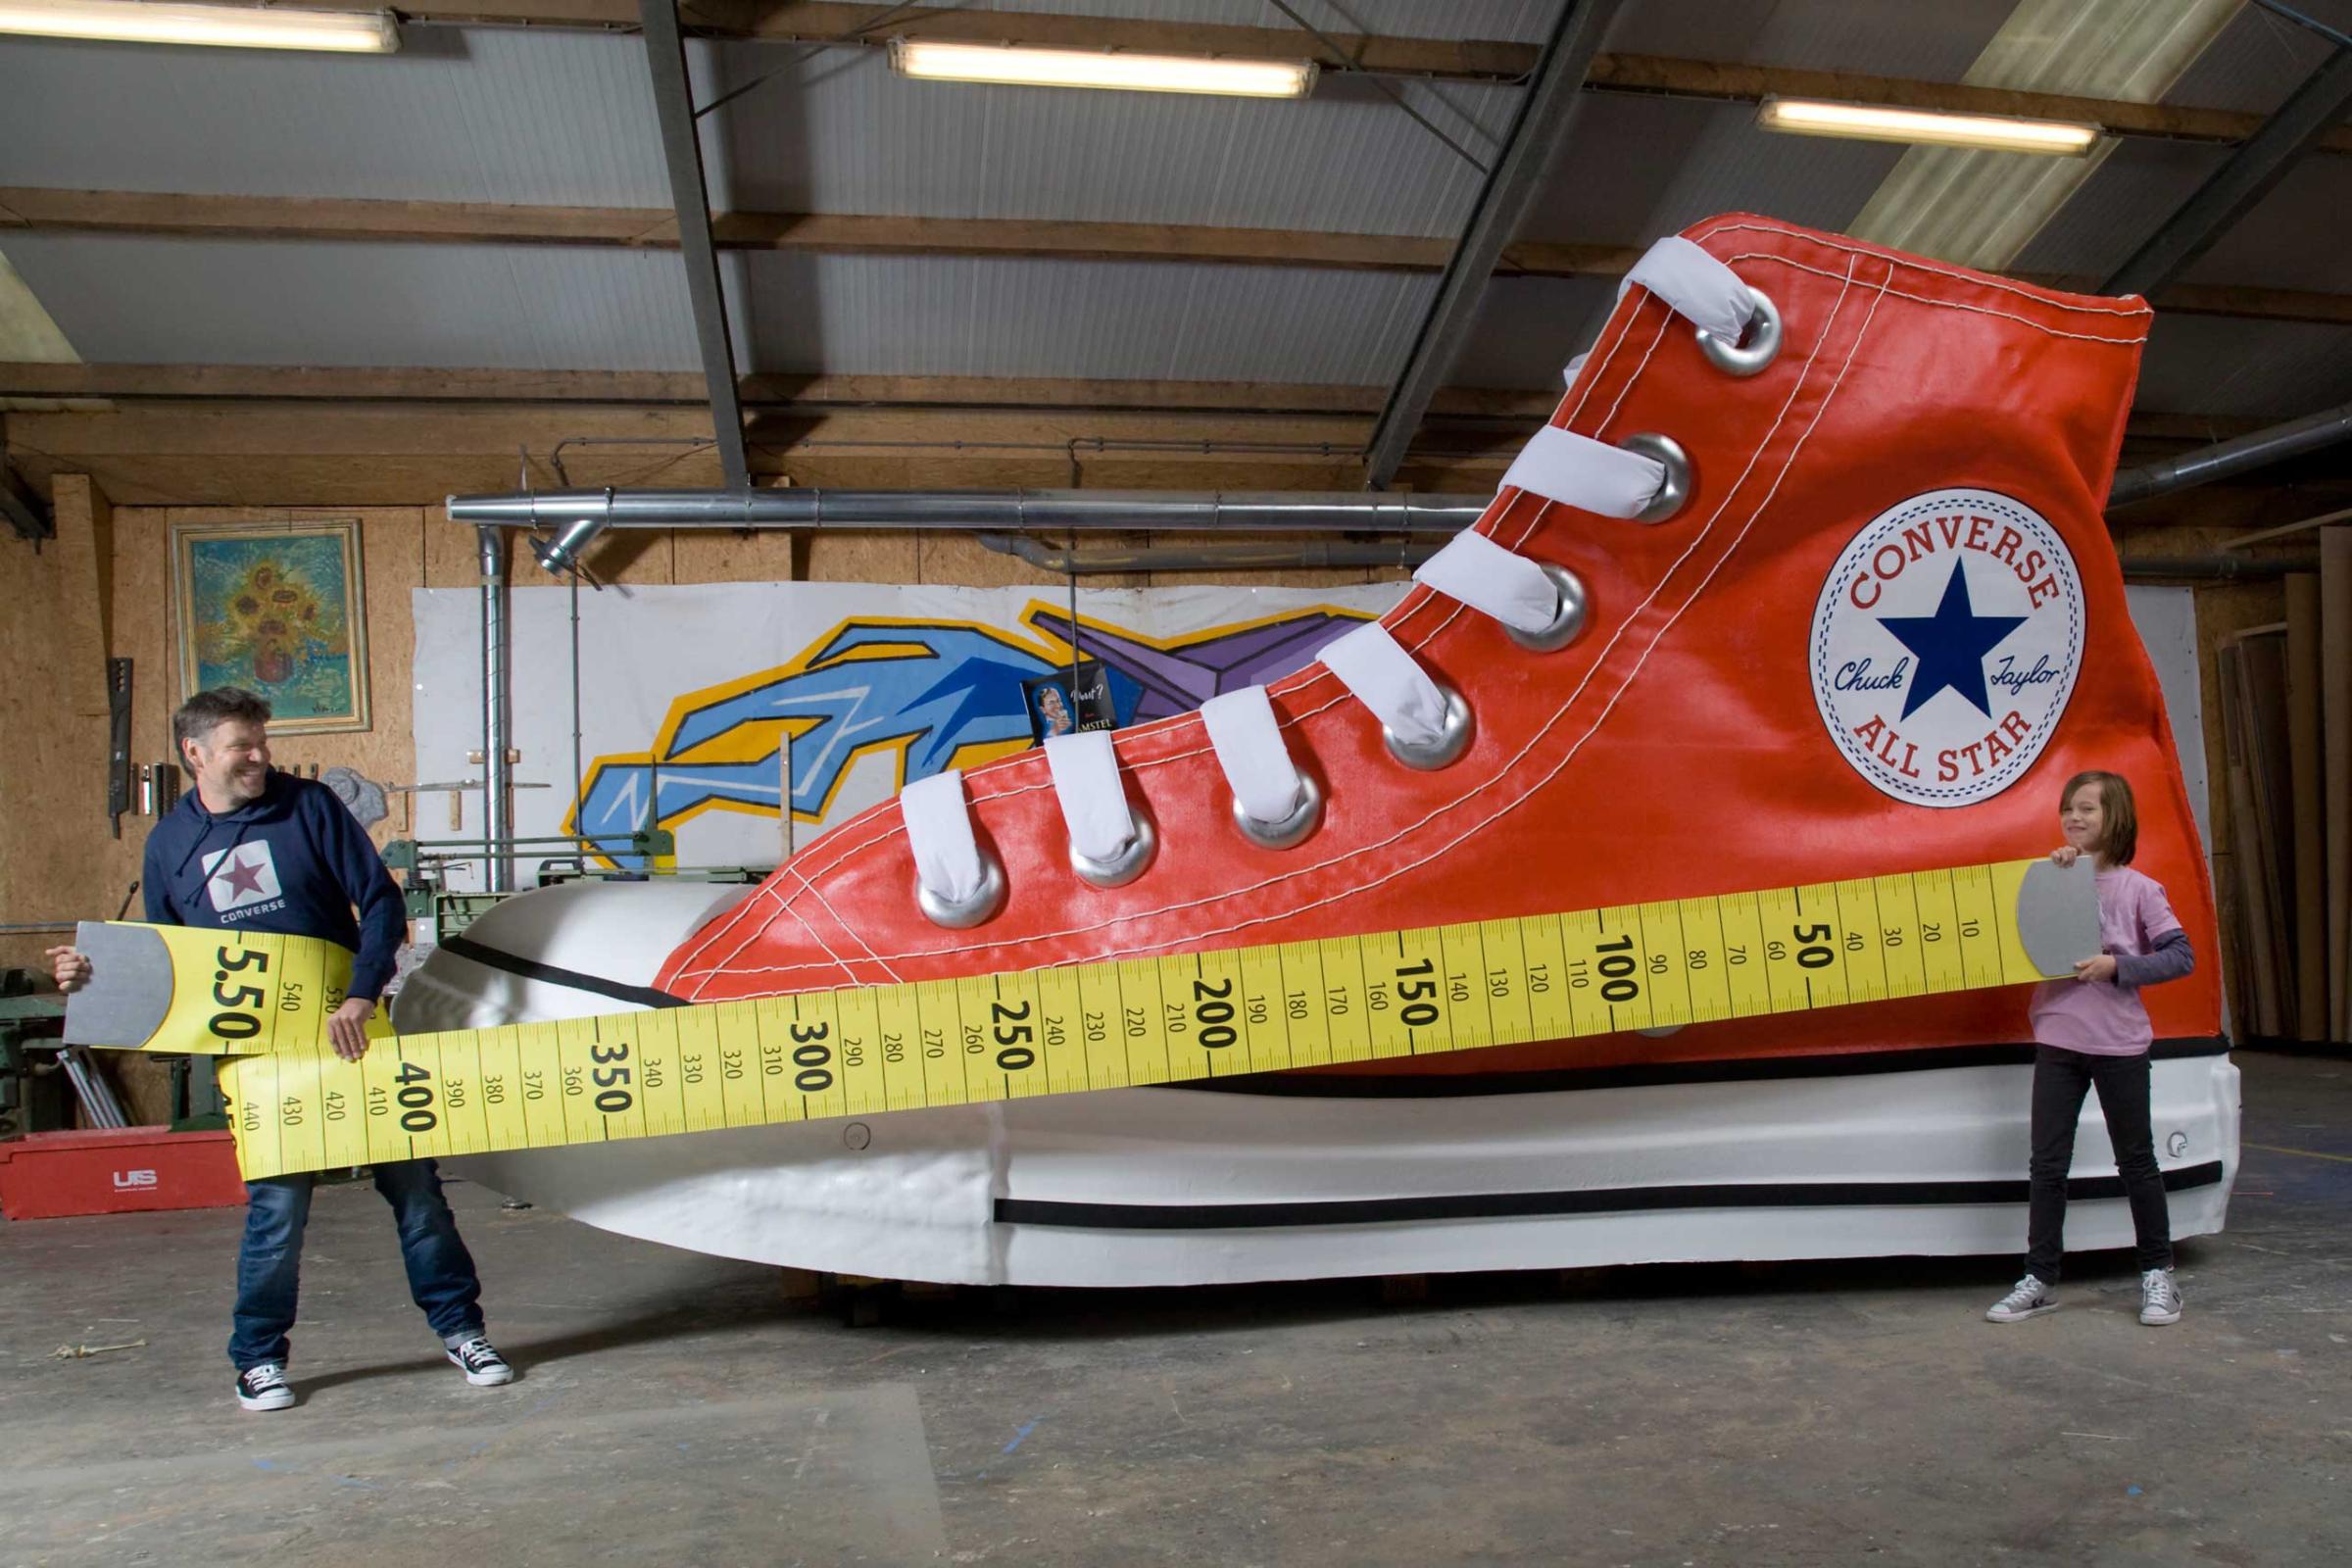 Largest ShoeAttempt Text The largest shoe measures 5.50 m (18 ft 0.53 in) x 2.11 m (6 ft 11.07 in) and is 2.90 m (9 ft 6.17 in) high and was unveiled by the Nationaal Fonds Kinderhulp (Netherlands) in Amsterdam, the Netherlands, on 17 November 2010, in celebration of Guinness World Records Day 2010. Further Info The largest shoe is an exact replica of a Converse Chuck Taylor All Star equivalent of a UK size 845. A Converse Chuck Taylor All Star European size 39 was used as a model for the largest shoe.